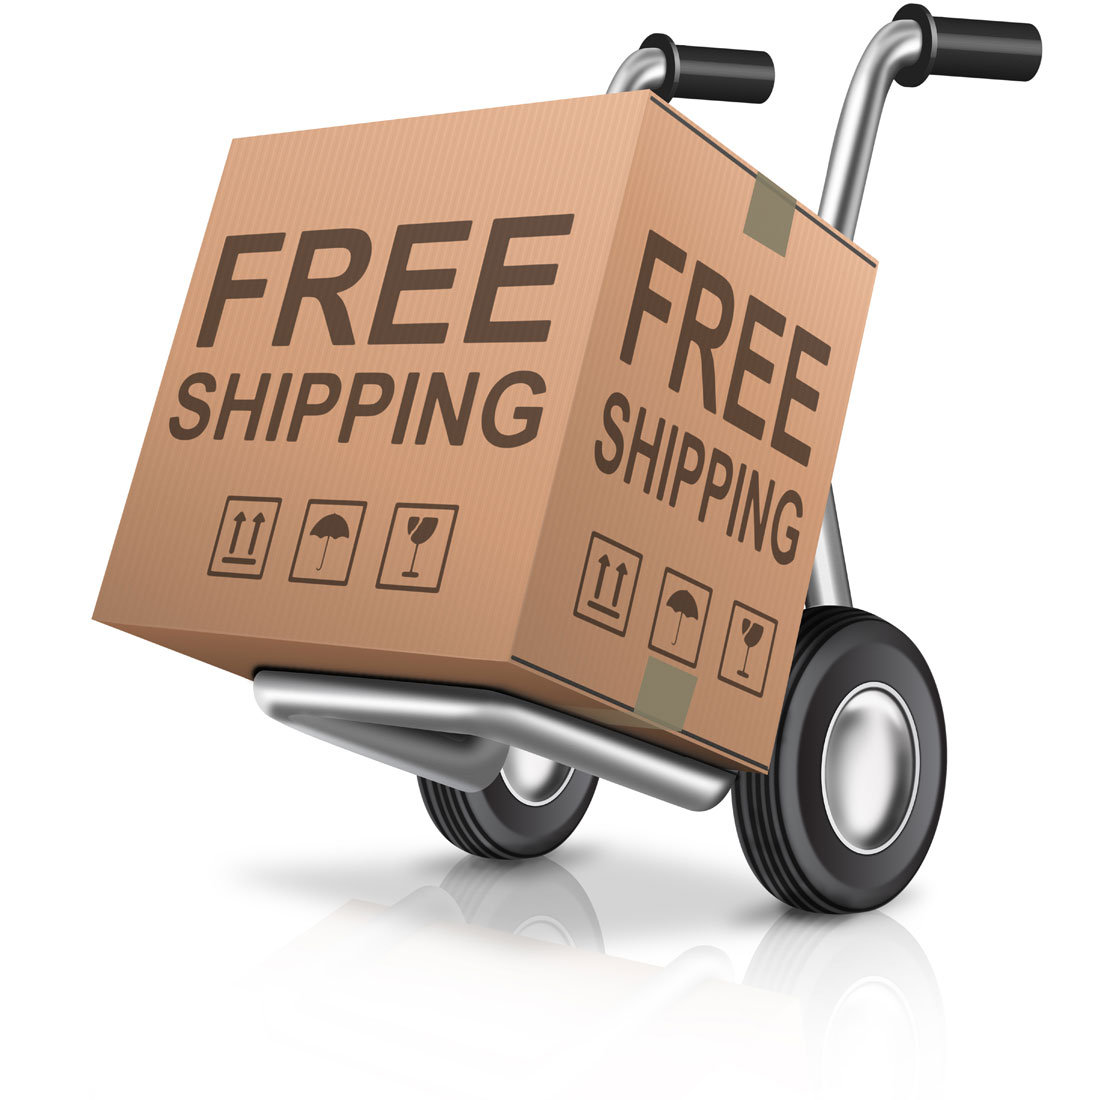 Free Shipping on Unistrut Parts Fittings and Hardware. Some conditions apply. 